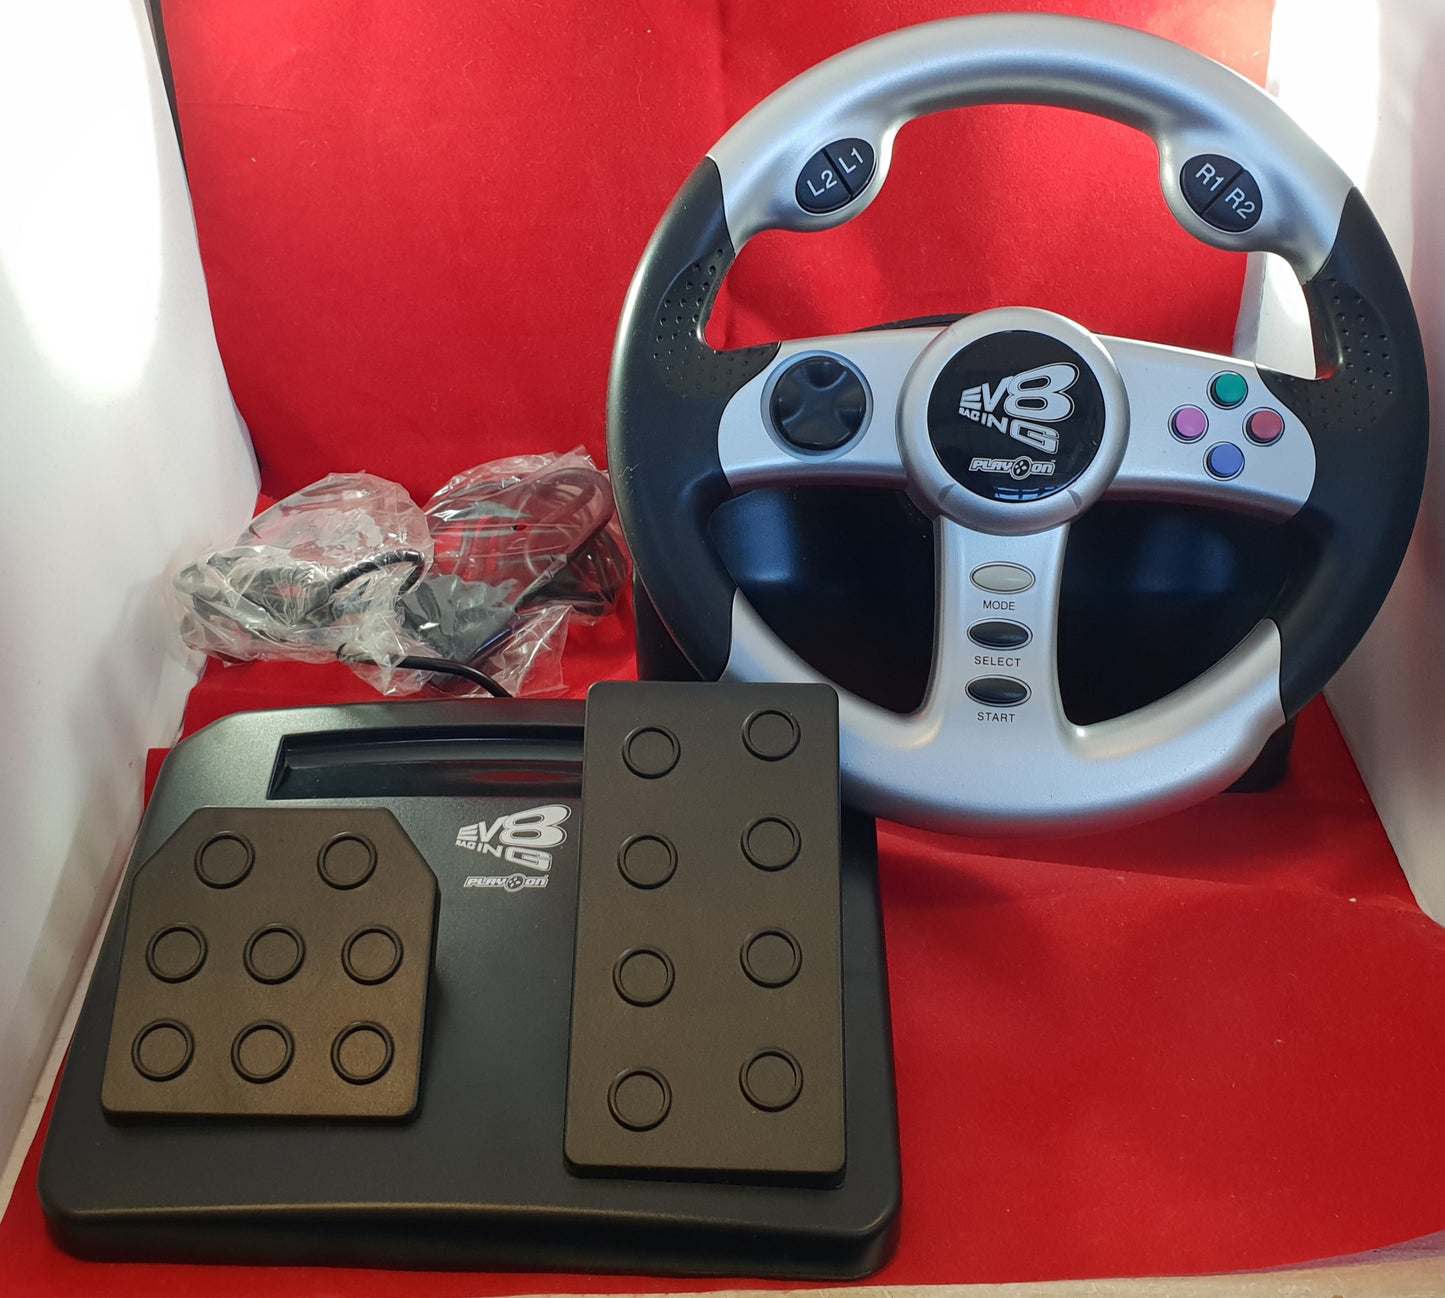 Boxed Play On V8 Racer Racing Wheel & Pedal Sony Playstation 2 (PS2) Accessory